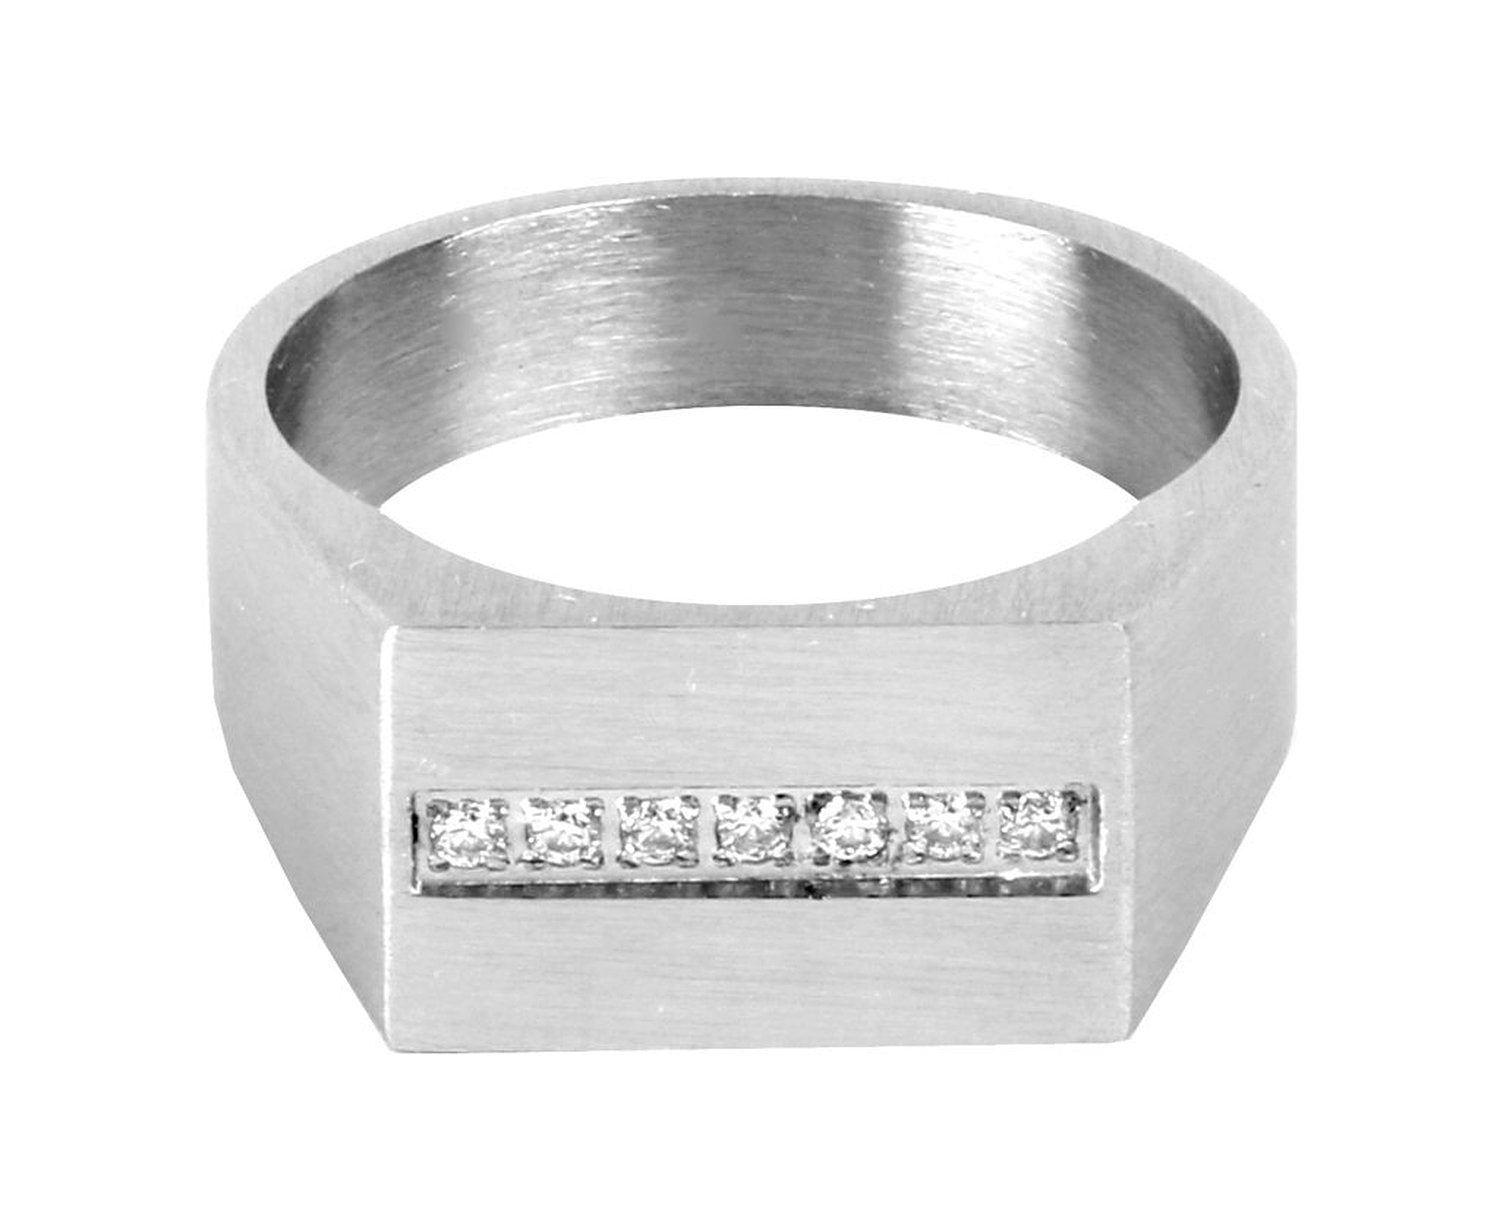 LOVE© TURNING® RING FOR BOYS MEN SILVER UNIQUE SIZE